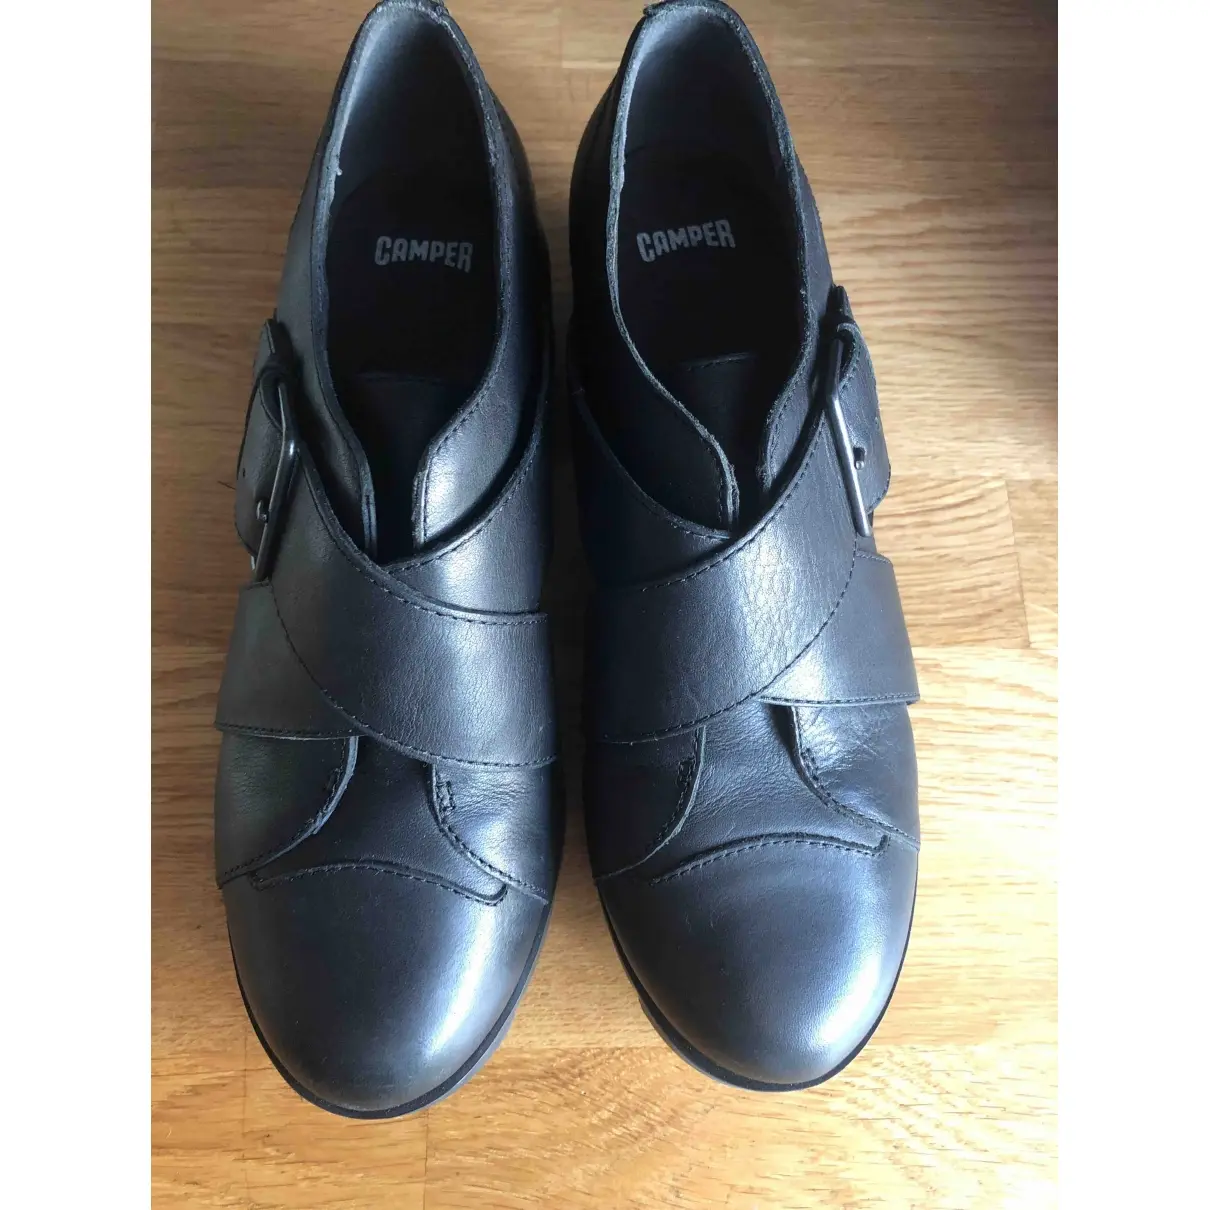 Camper Leather lace ups for sale